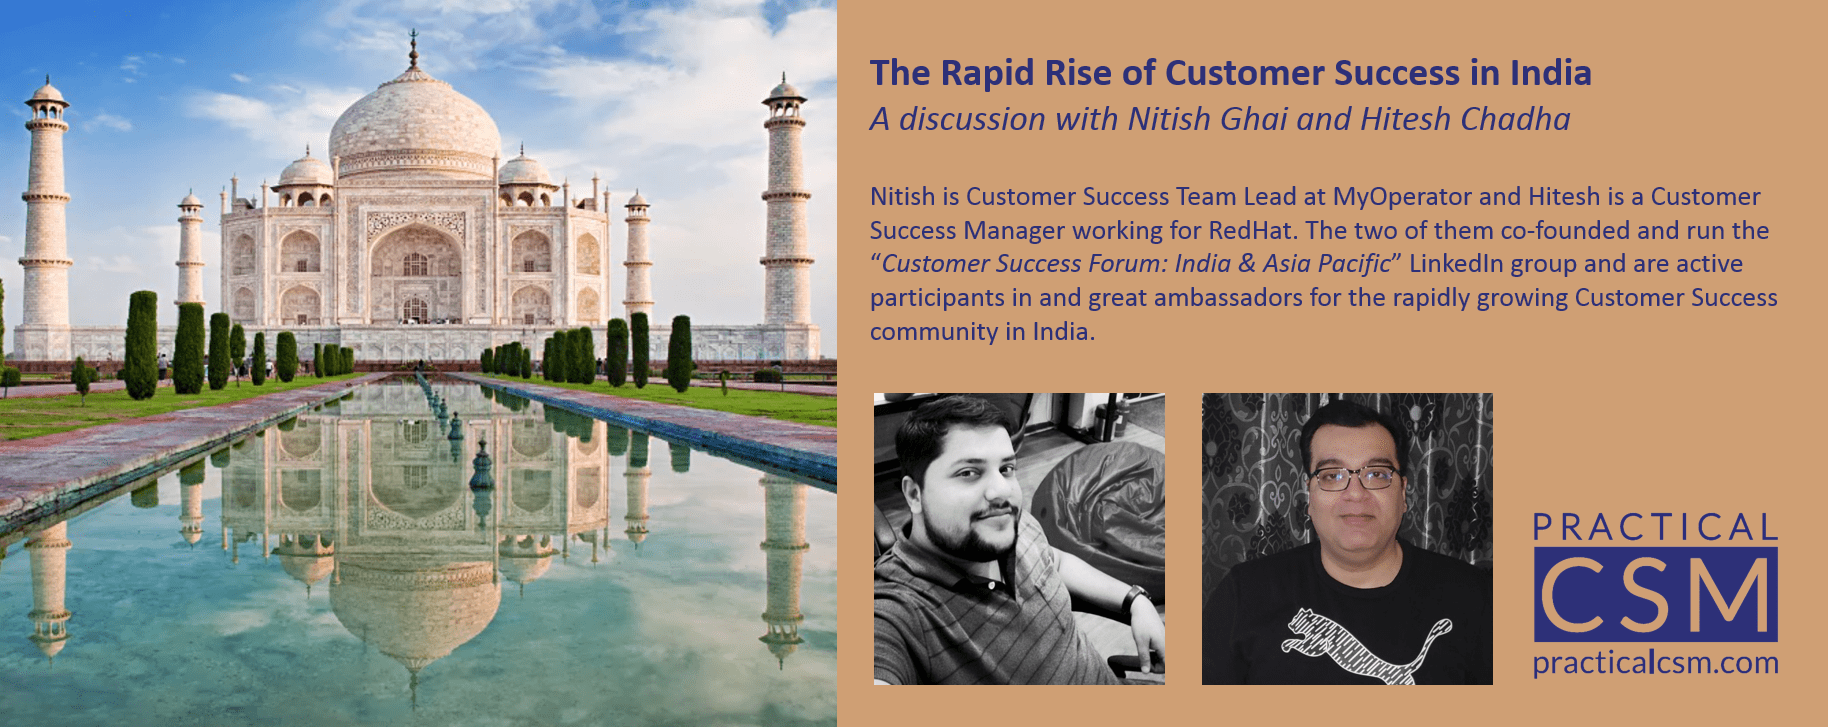 Practical CSM The Rapid Rise of Customer Success in India with Nitish Ghai and Hitesh Chadha